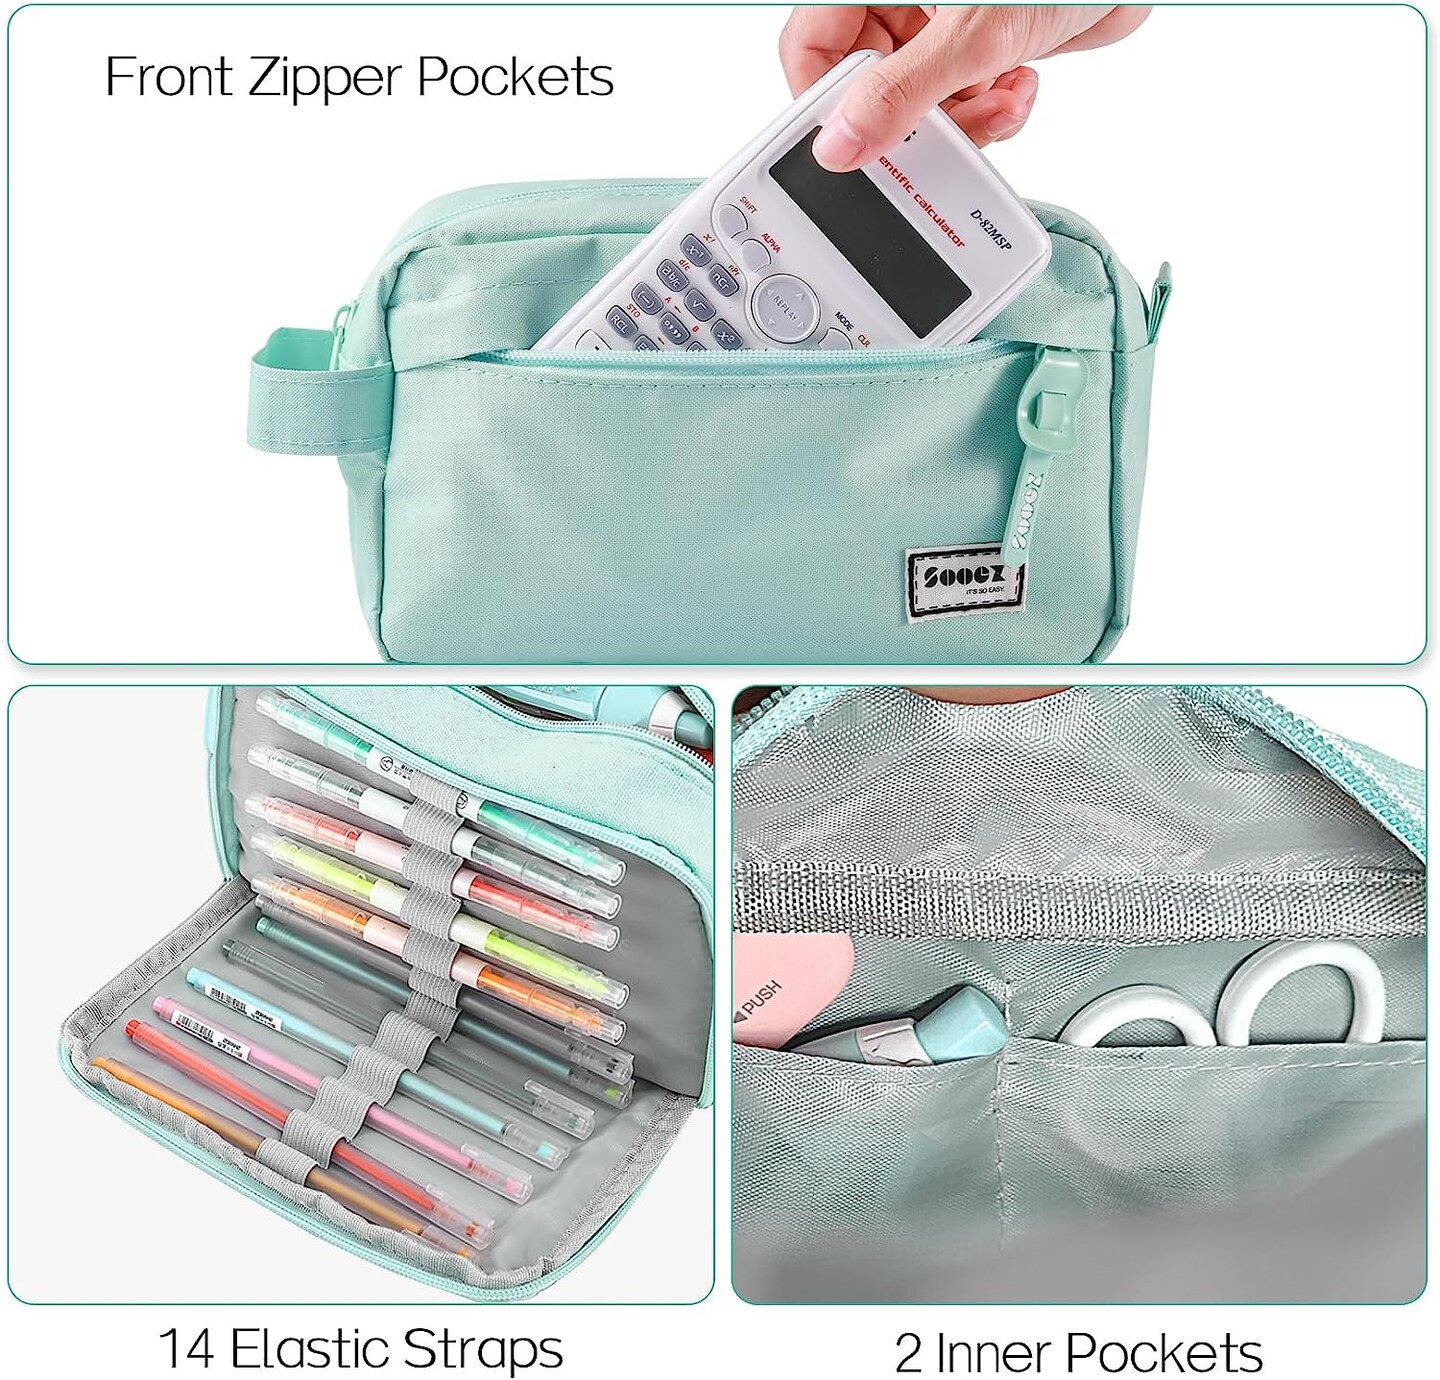  Sooez High Capacity Pencil Case For Girls, Durable Pen  Pencil Bag Stationery Zipper Pouch, Portable Journaling Supplies